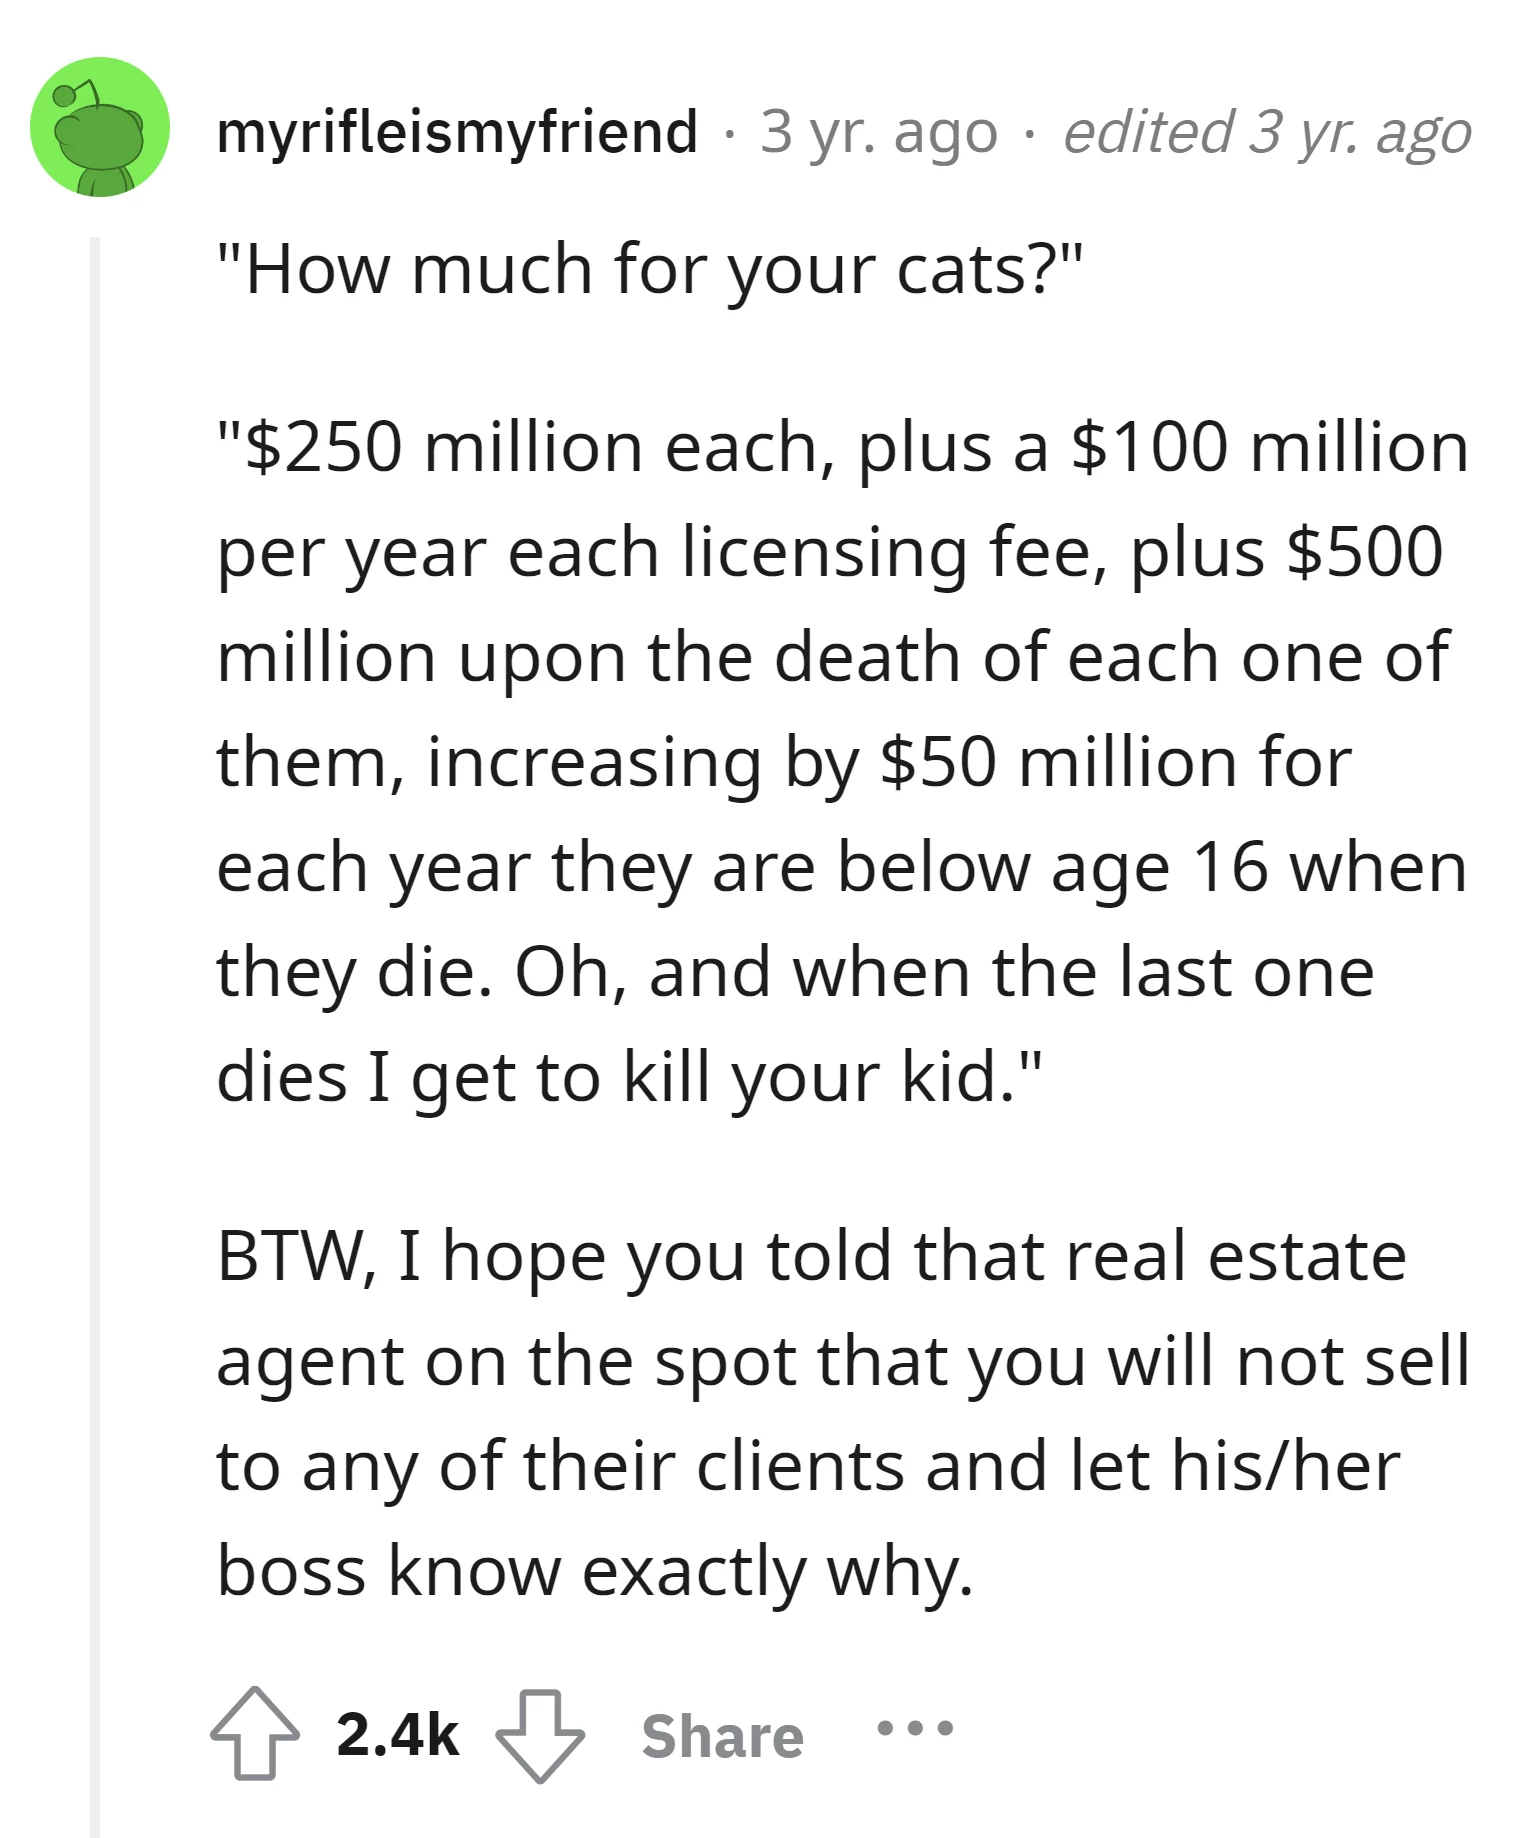 Inform the real estate agent and her boss about the situation.